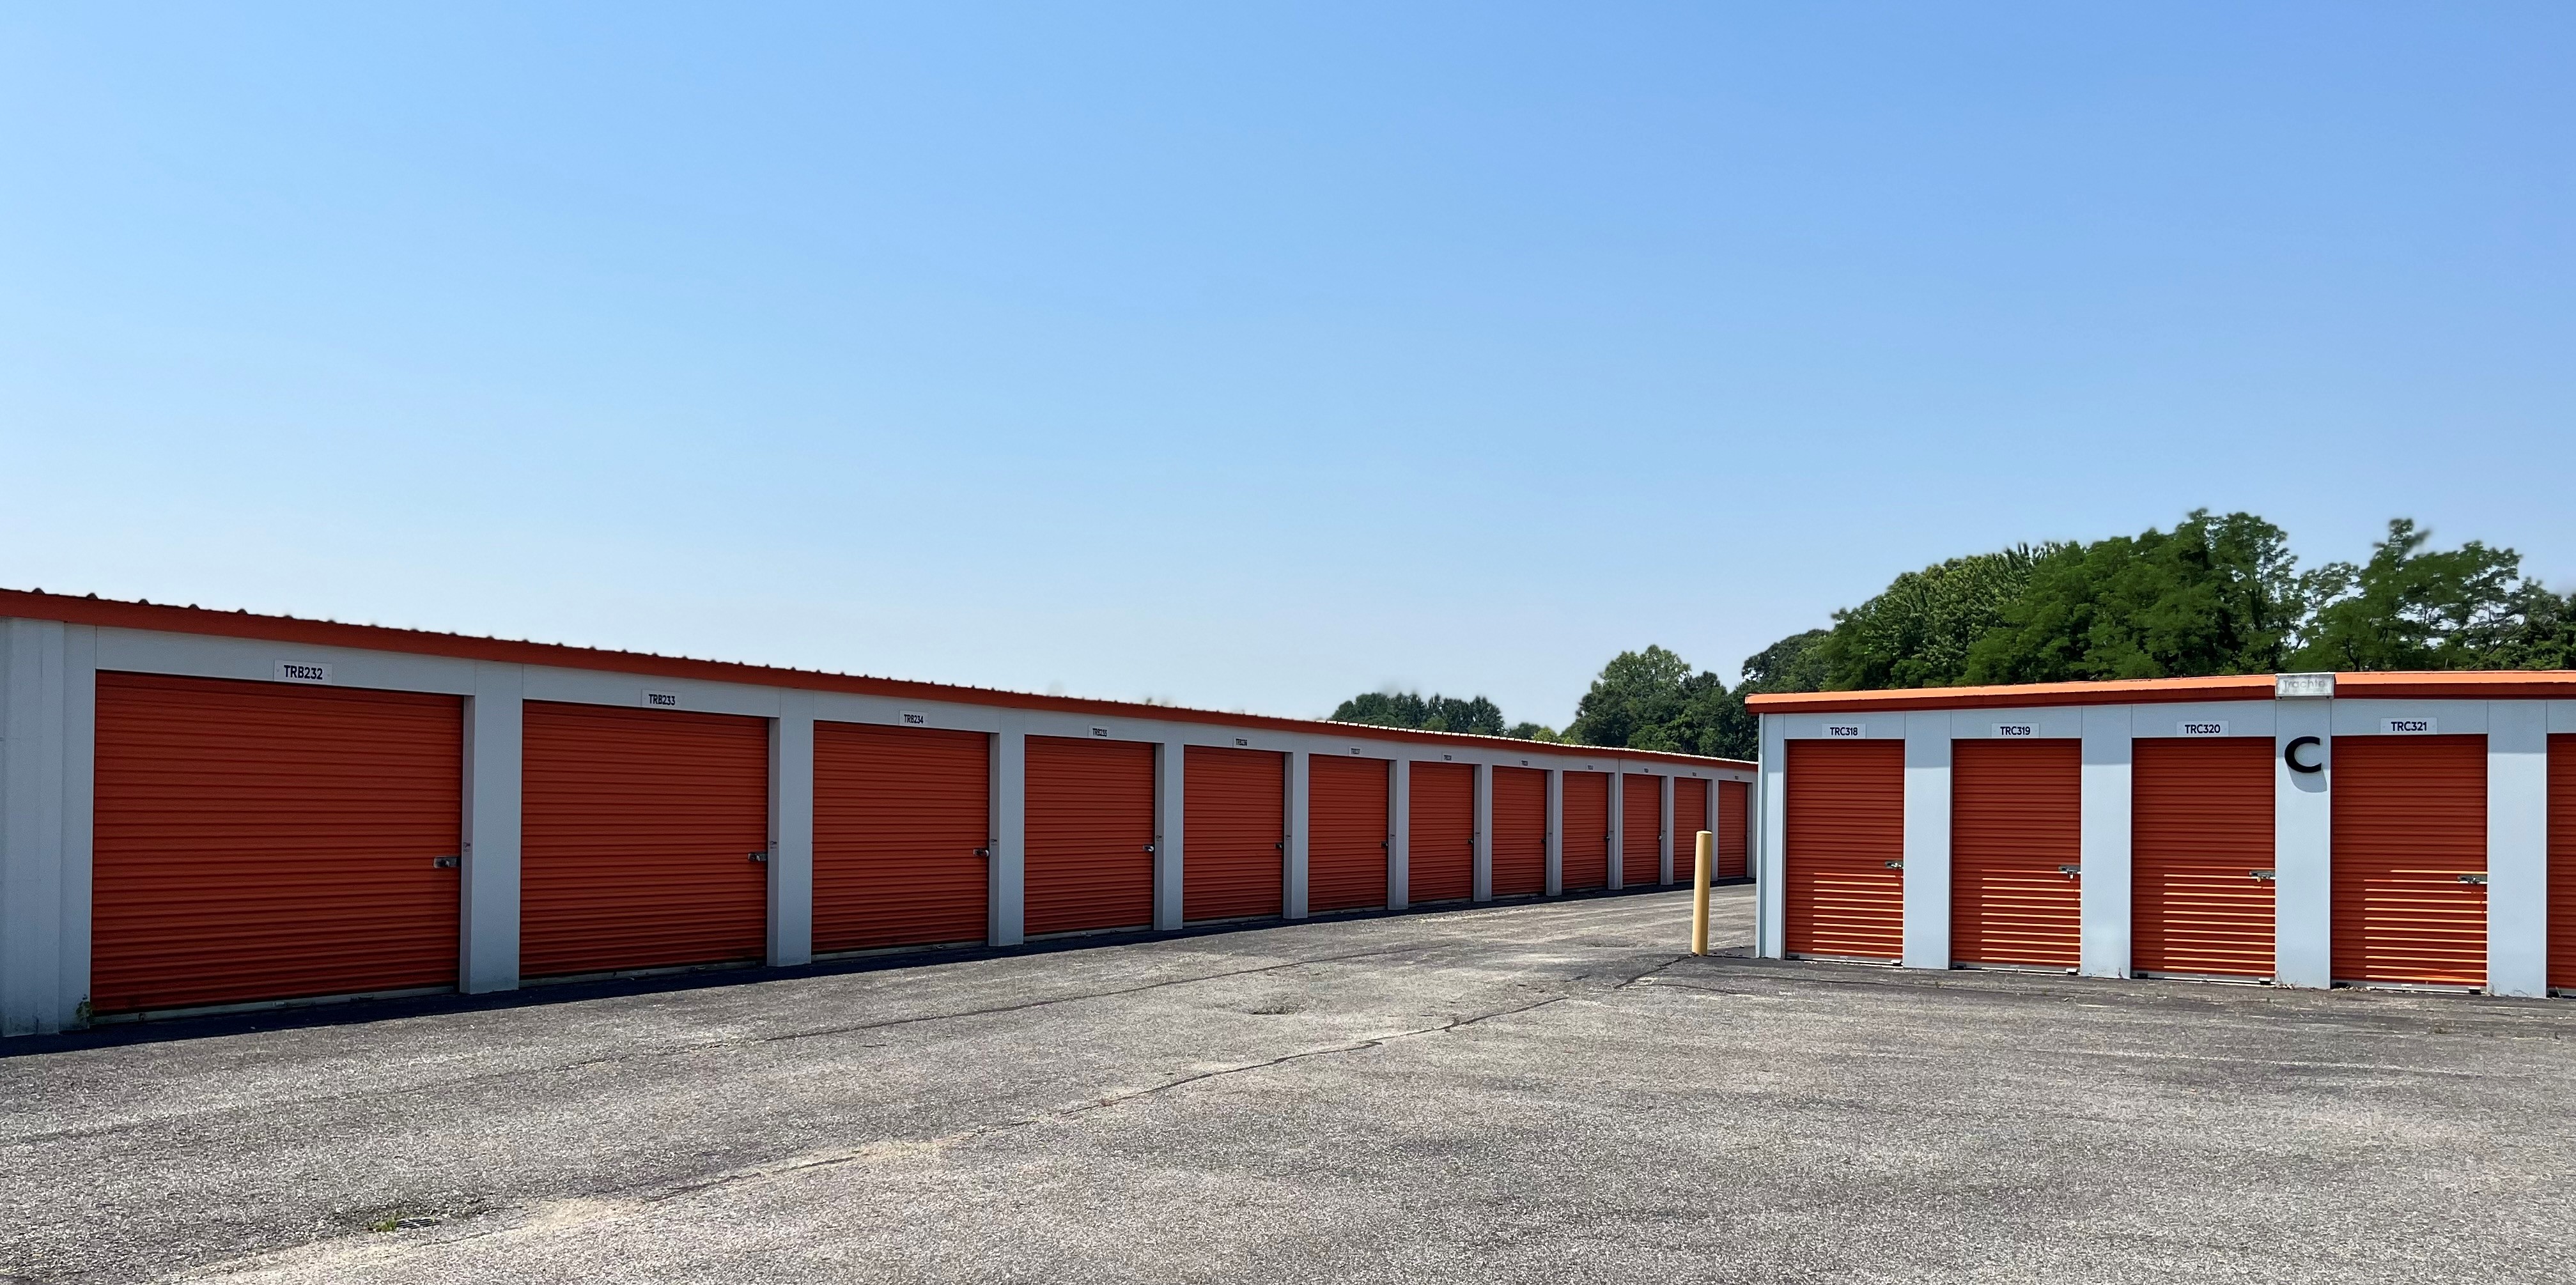 Jasper's Truman Rd Access Storage, offering drive-up units with white doors and expansive, well-paved driveways for smooth access.